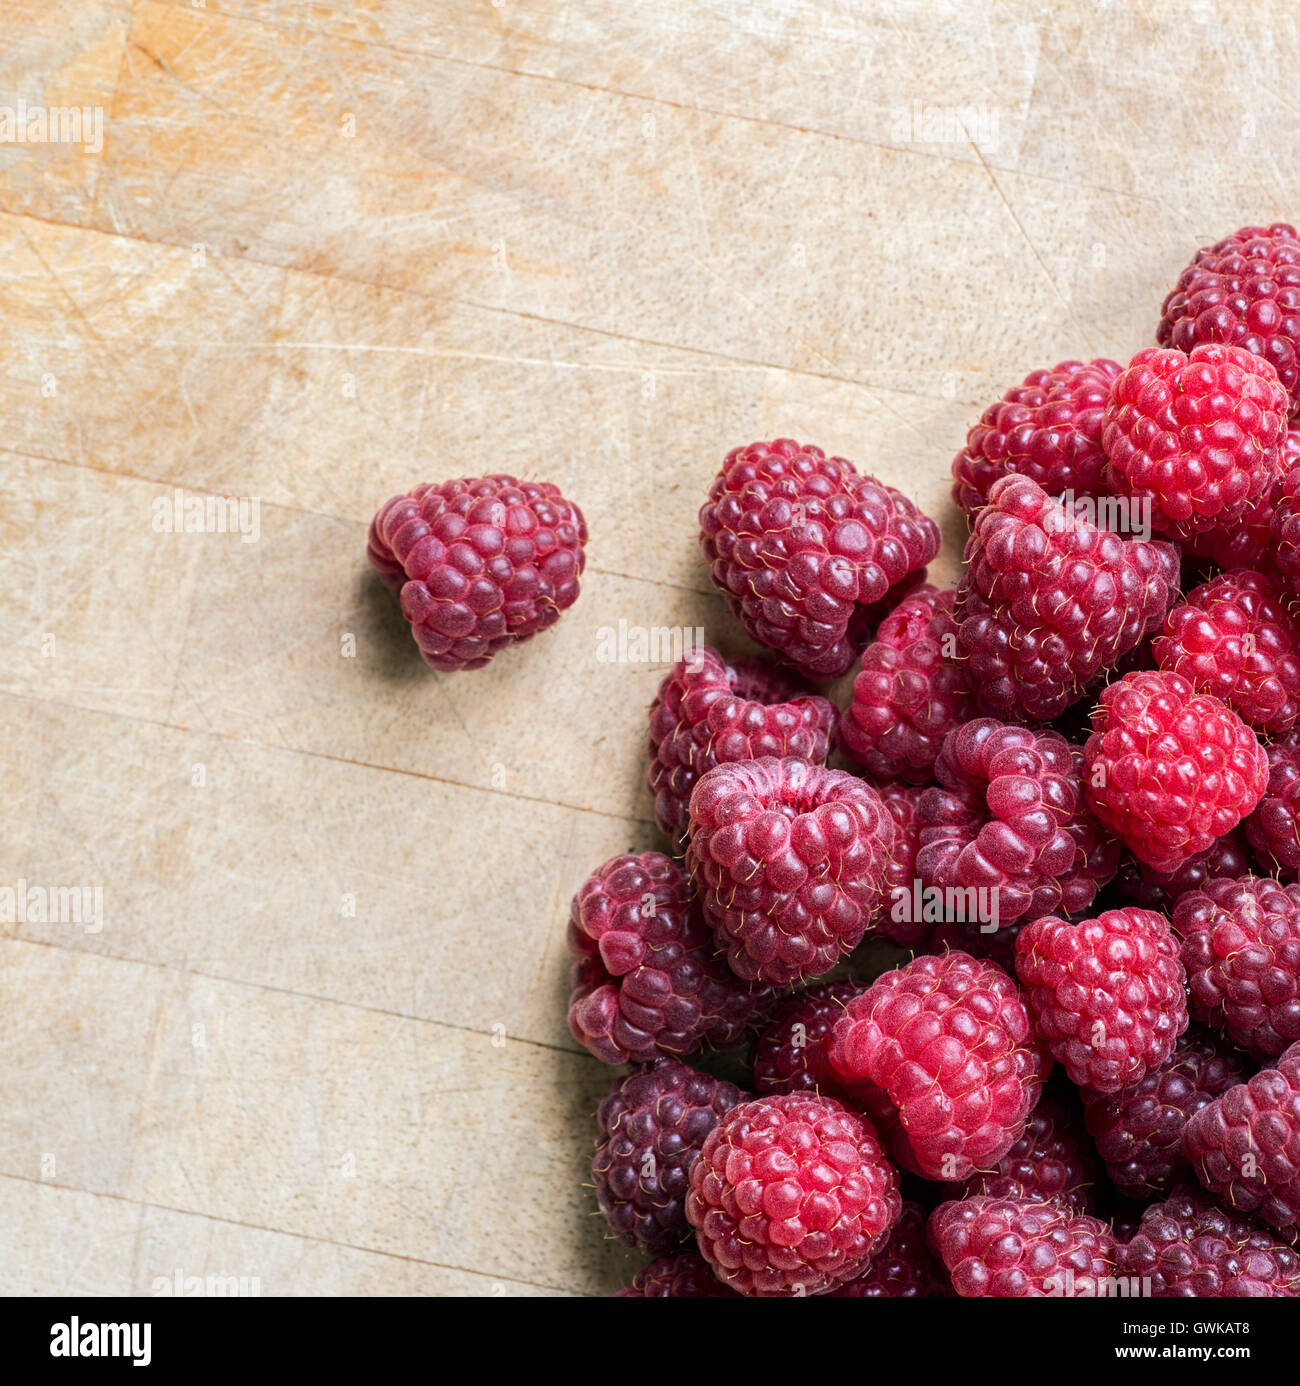 A pile of fresh raspberries on a wooden board Stock Photo